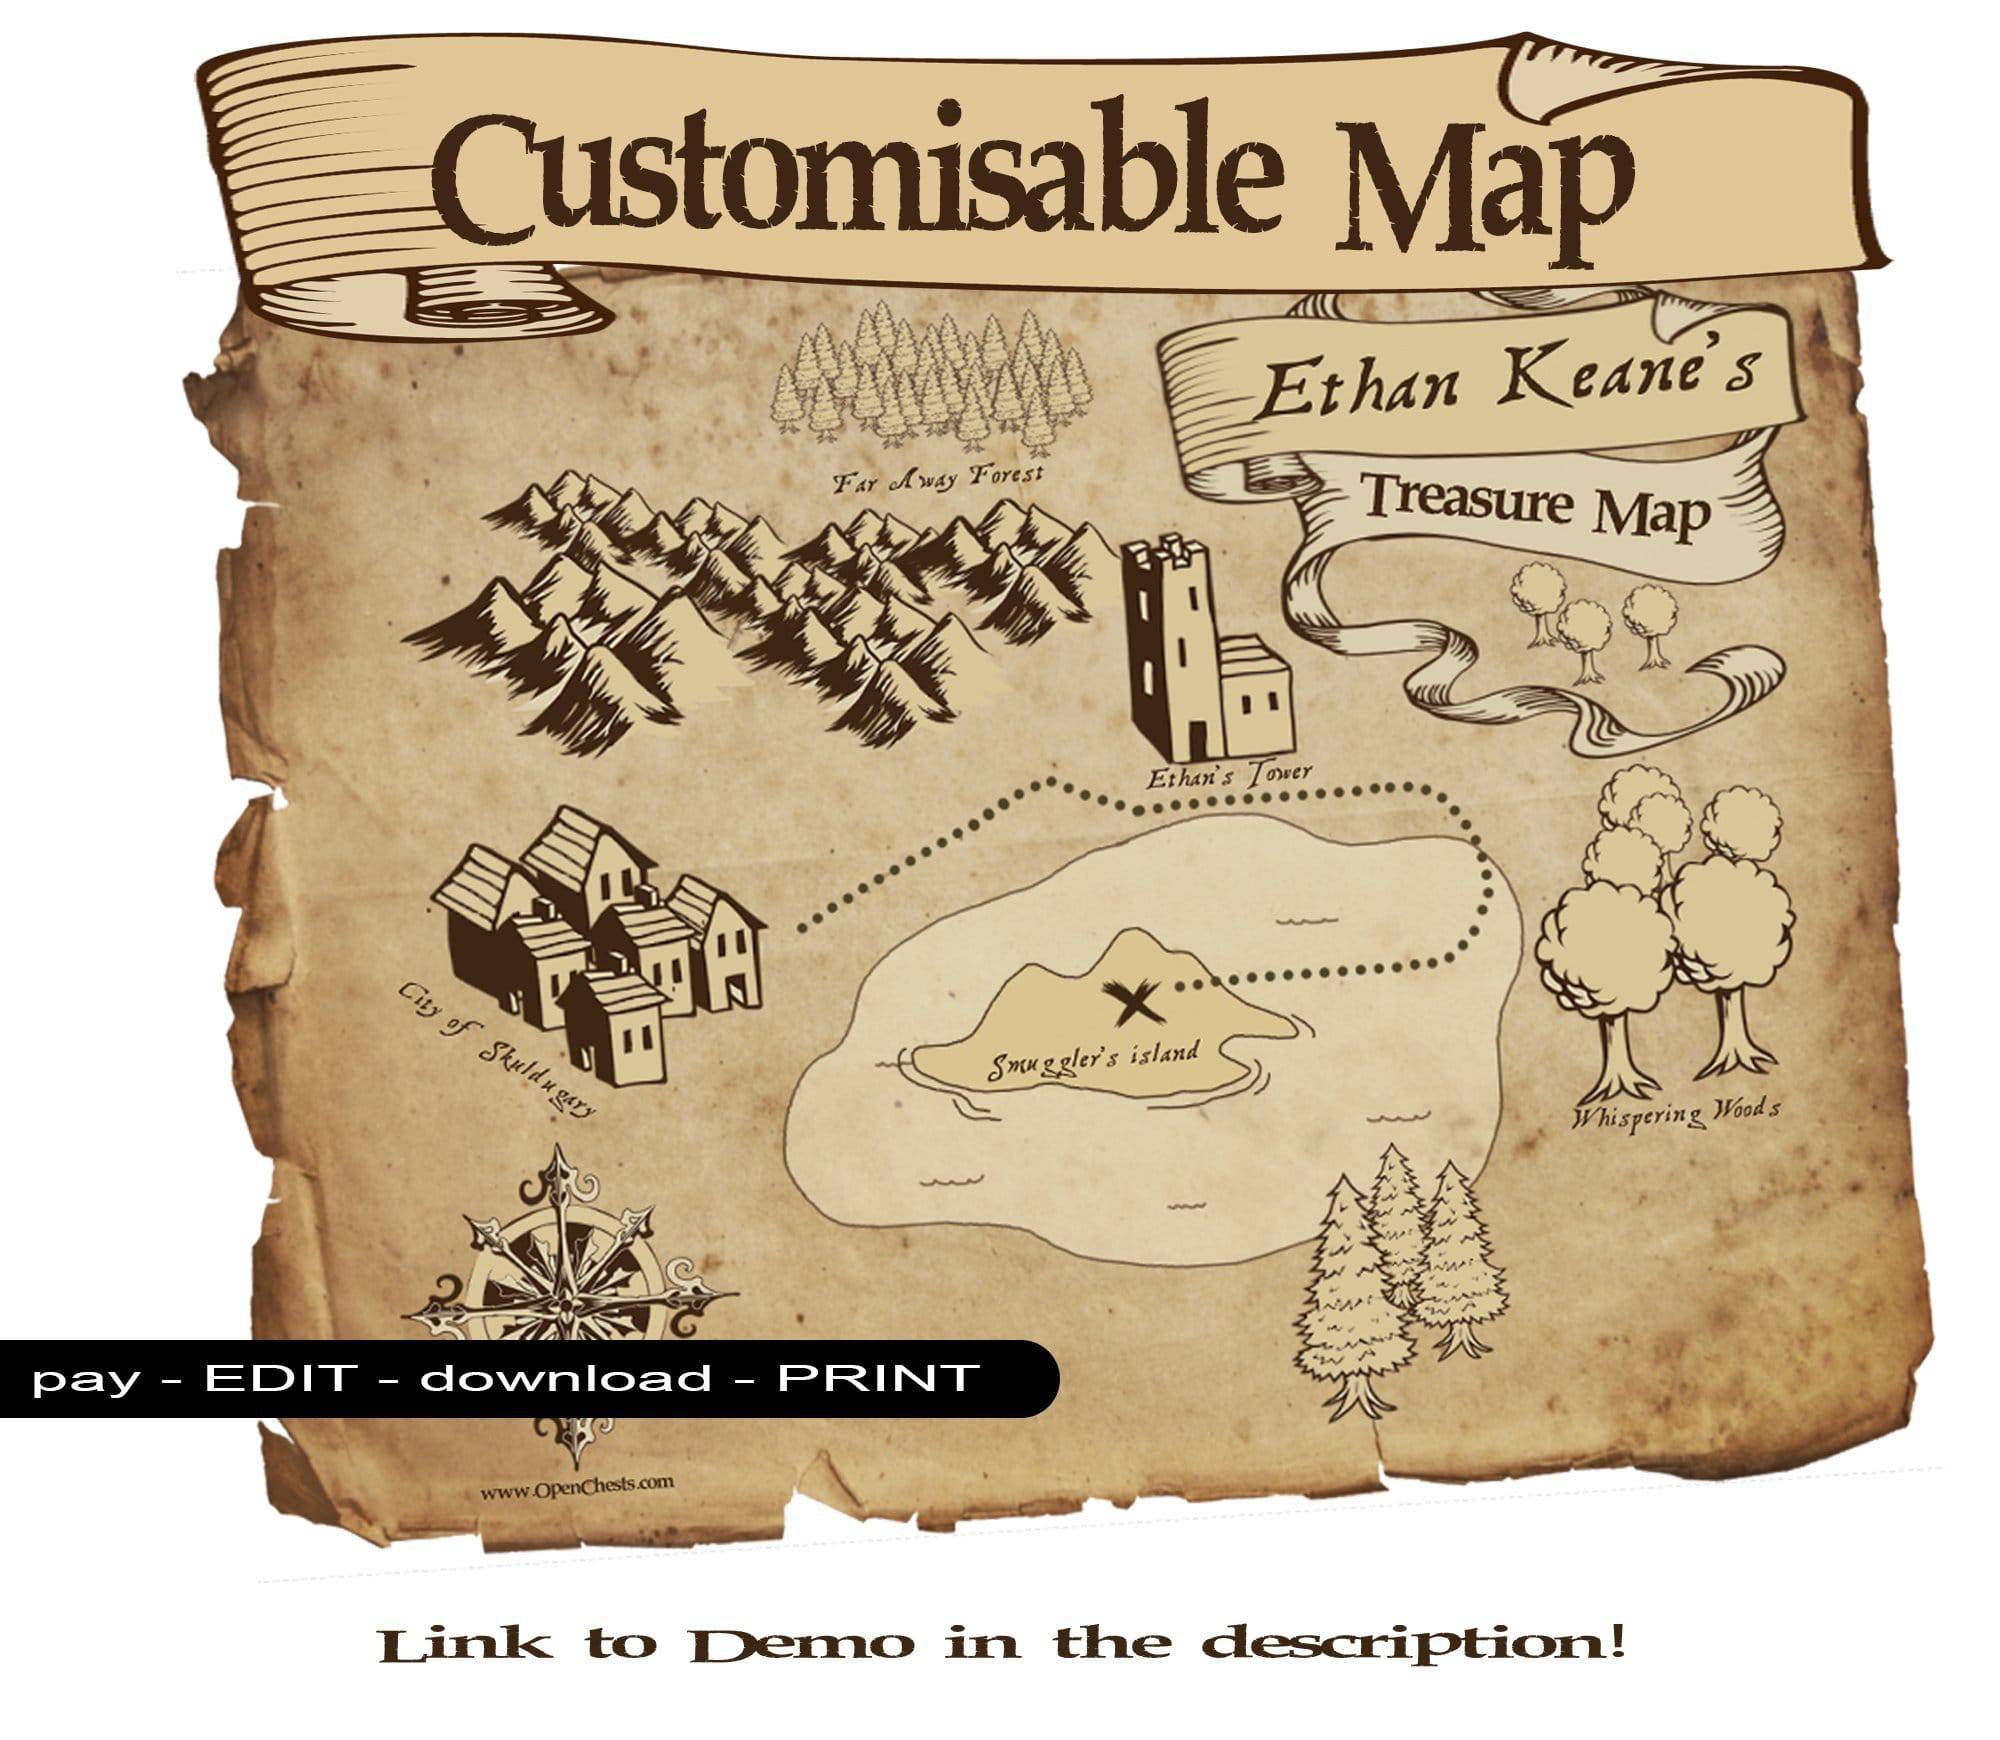 treasure map printable out